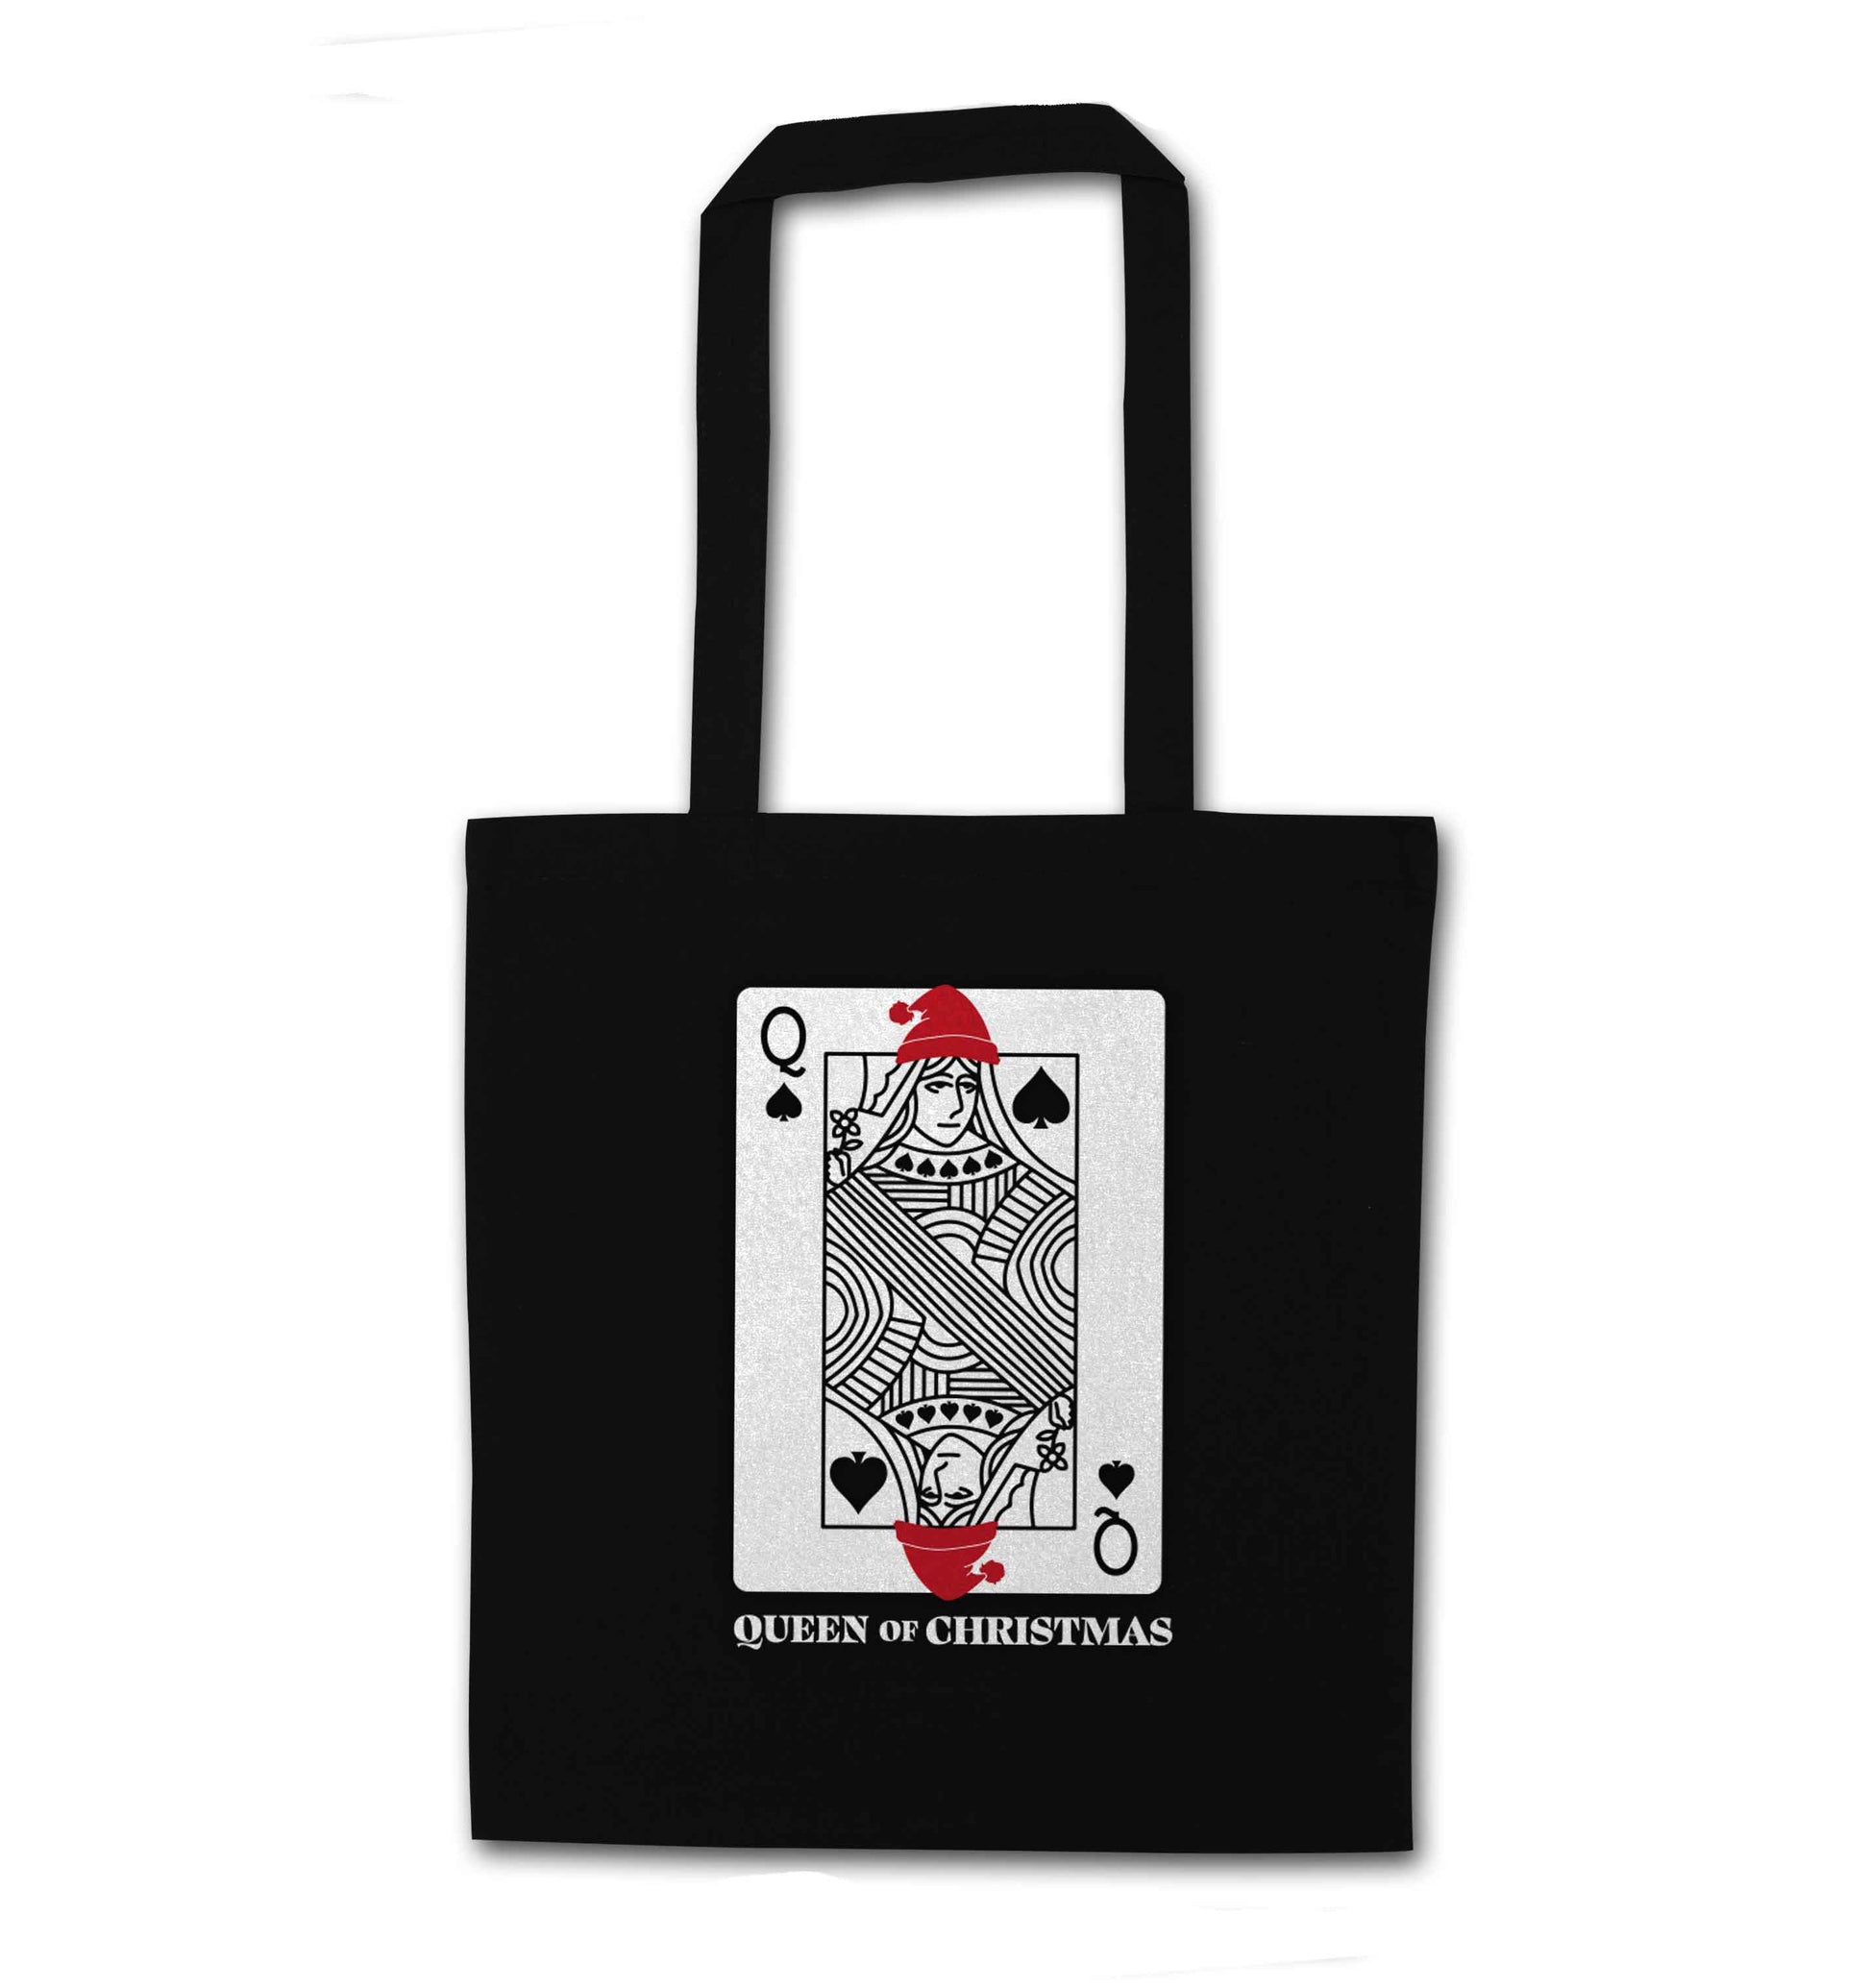 Queen of christmas black tote bag